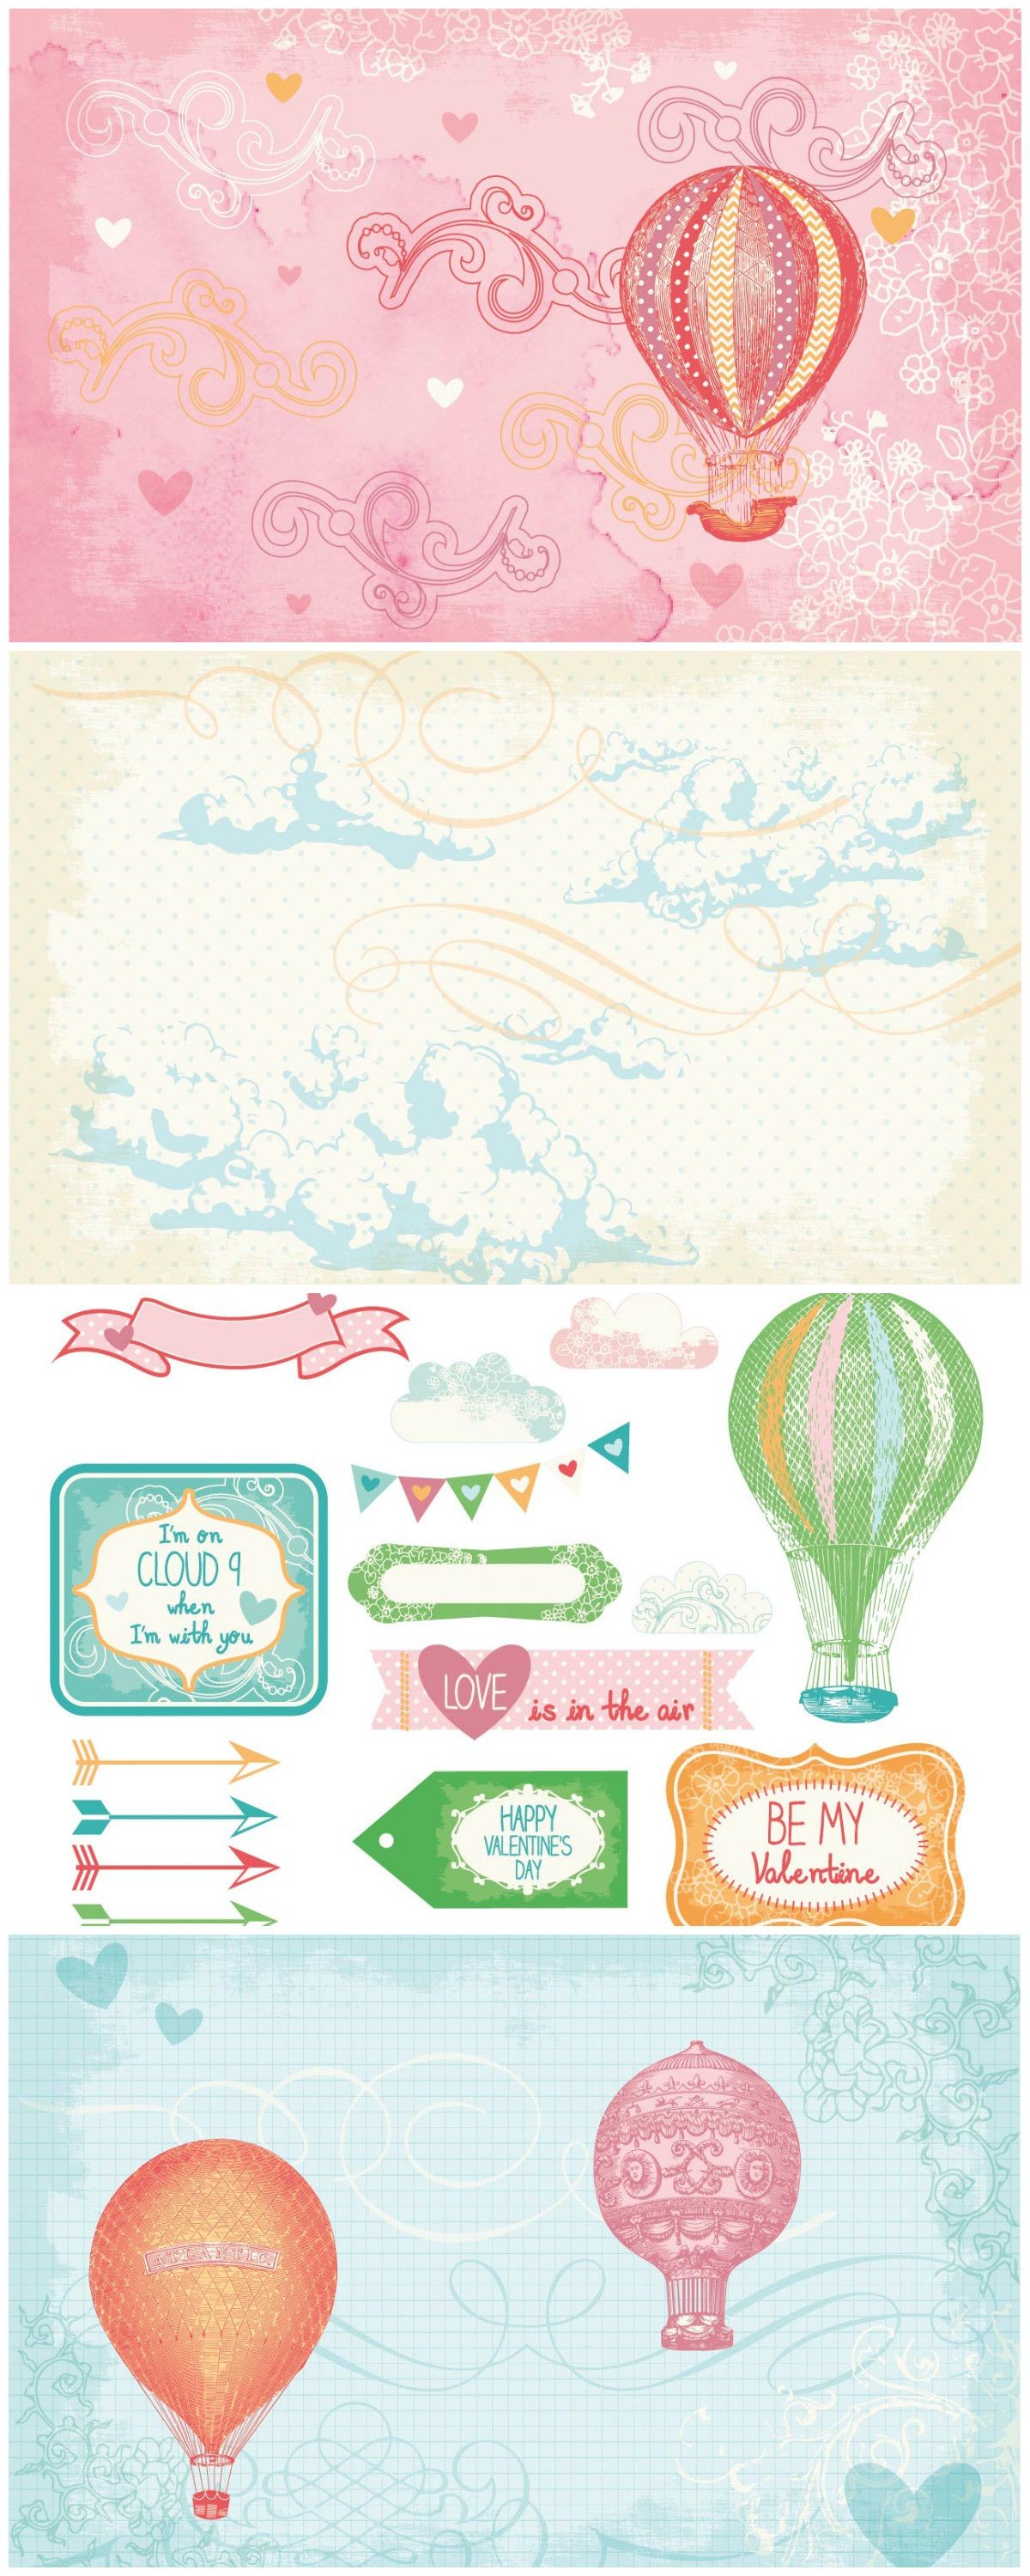 Papercraft Inspiration Hot Air Balloons Free Printable Papers and toppers